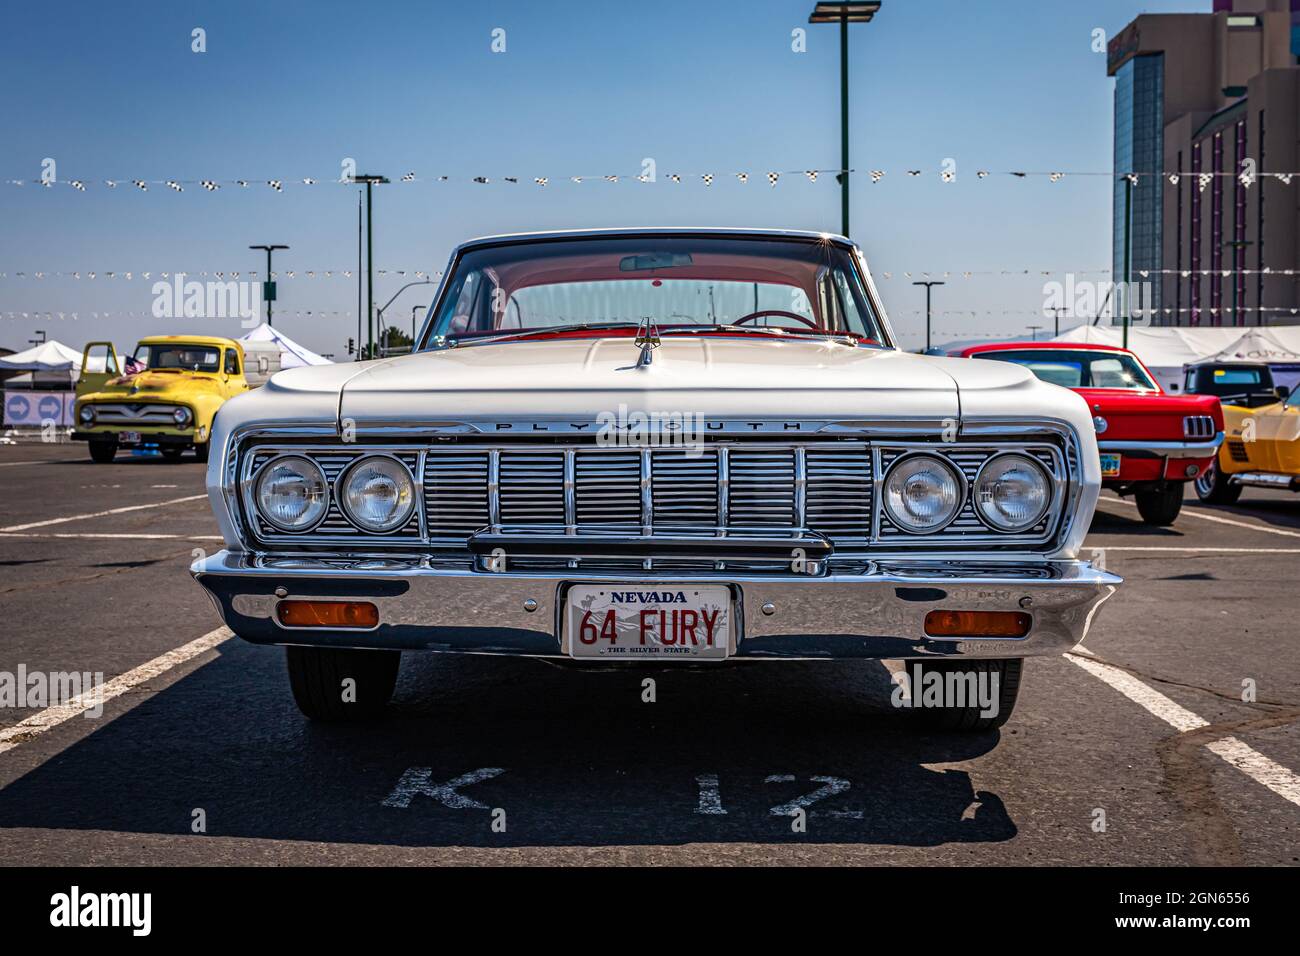 Reno, NV - August 3, 2021: 1964 Plymouth Sport Fury hardtop coupe at a local car show. Stock Photo